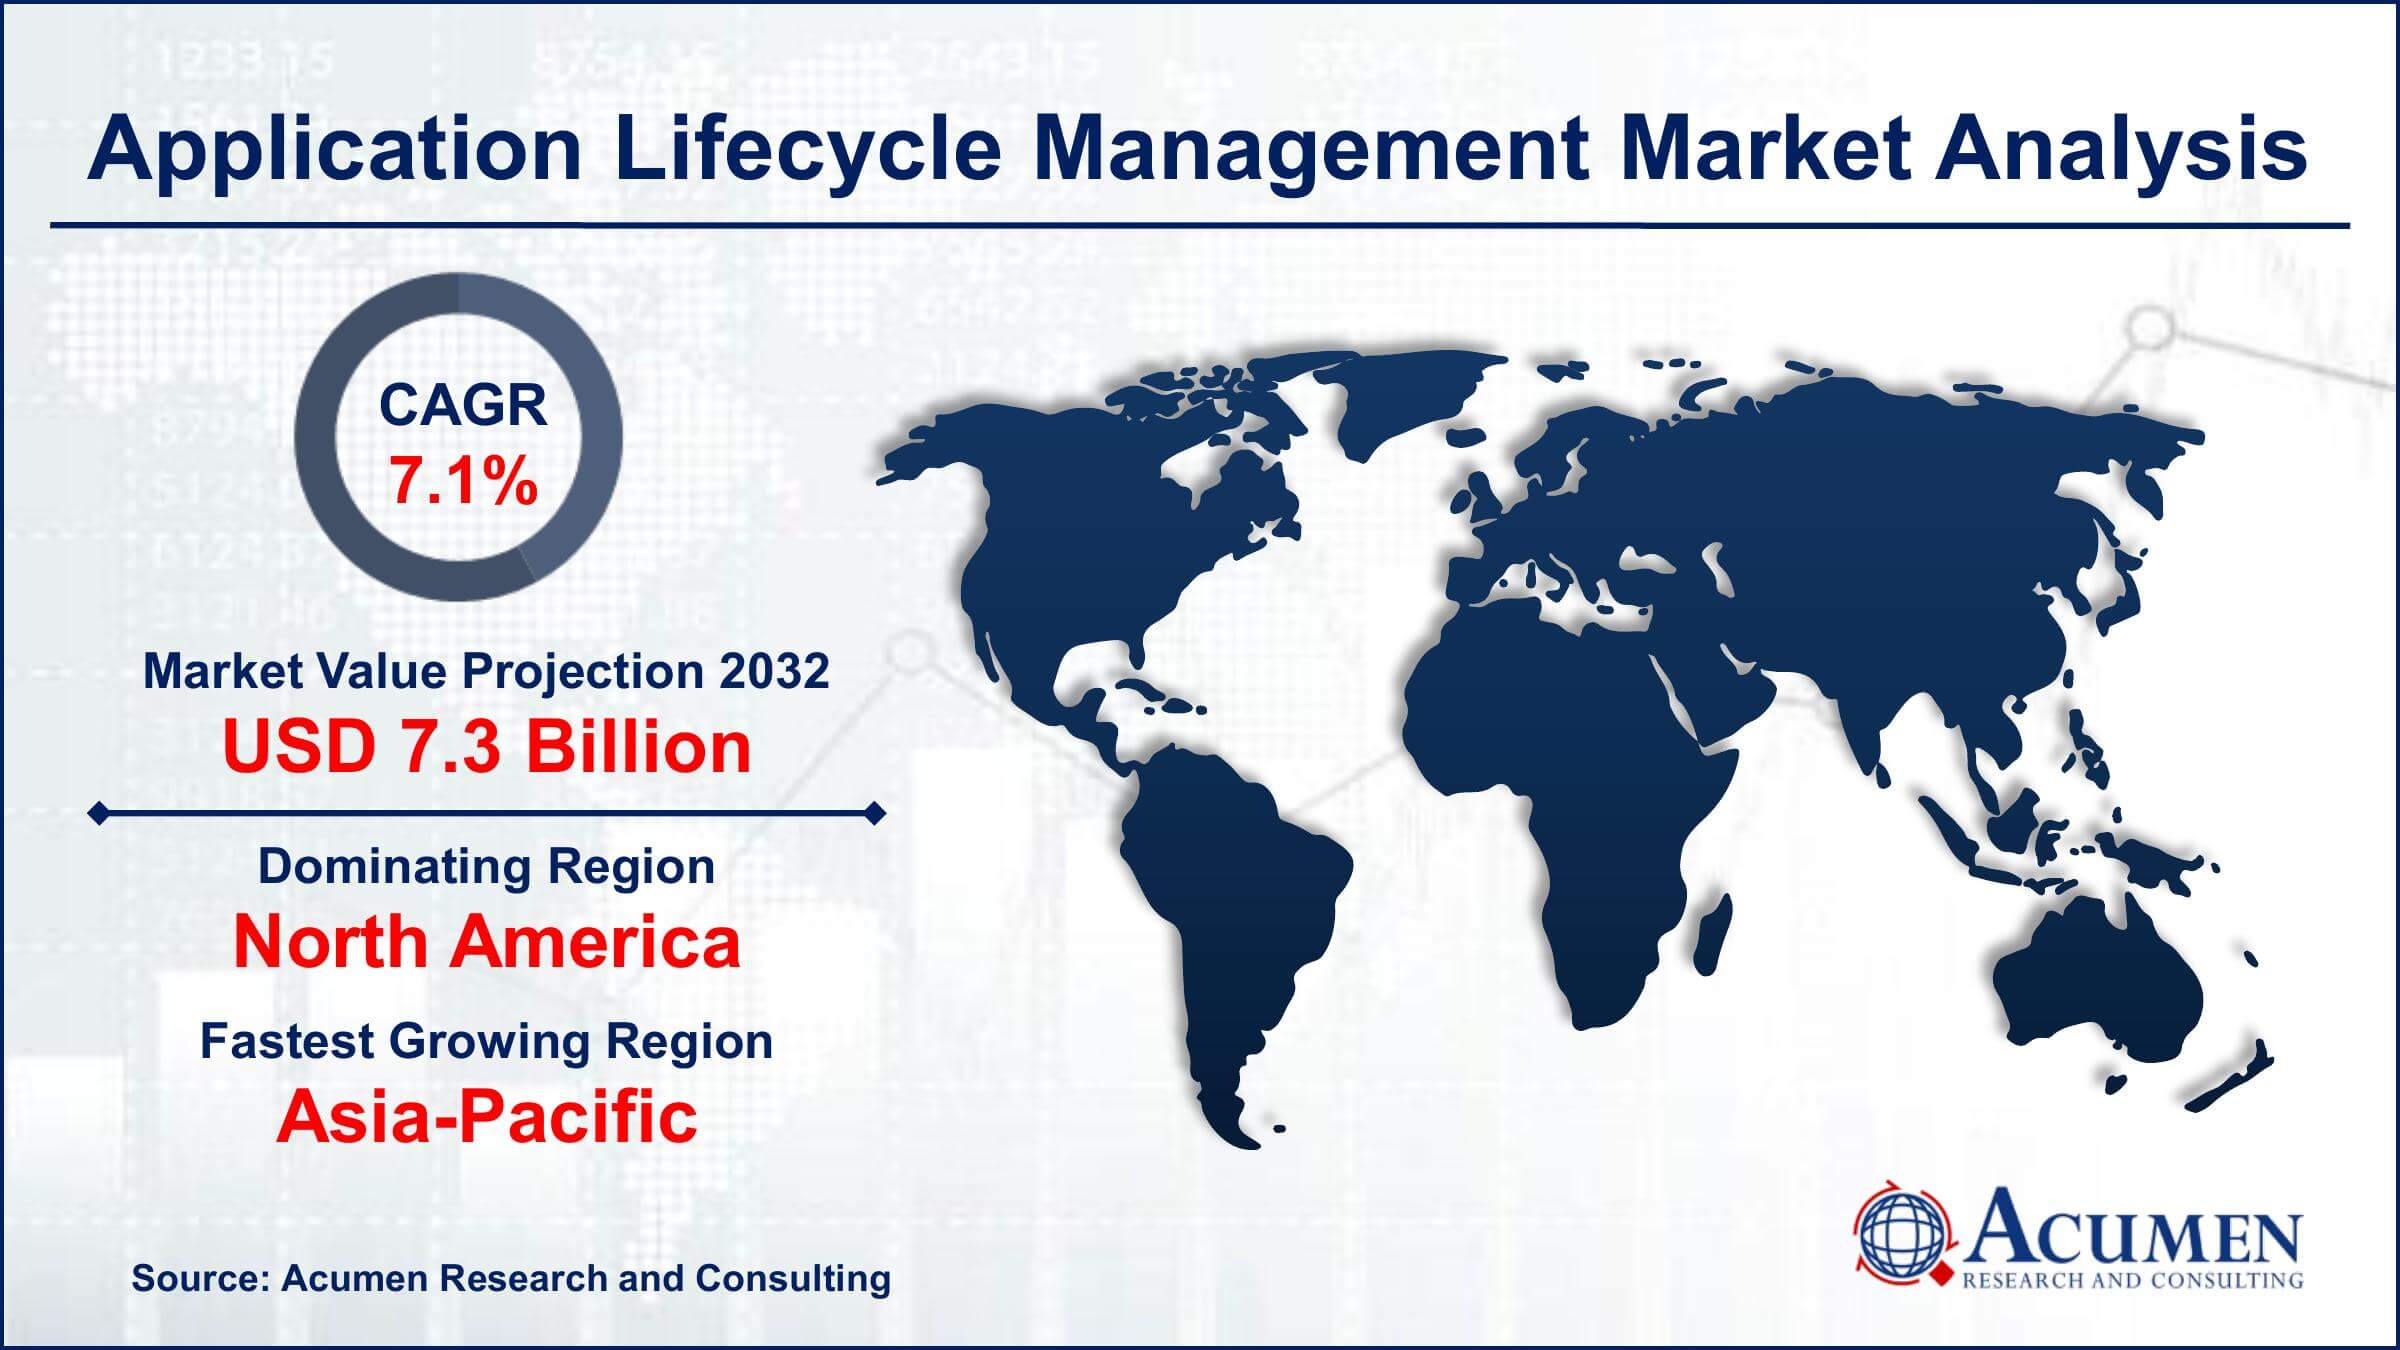 Global Application Lifecycle Management Market Trends